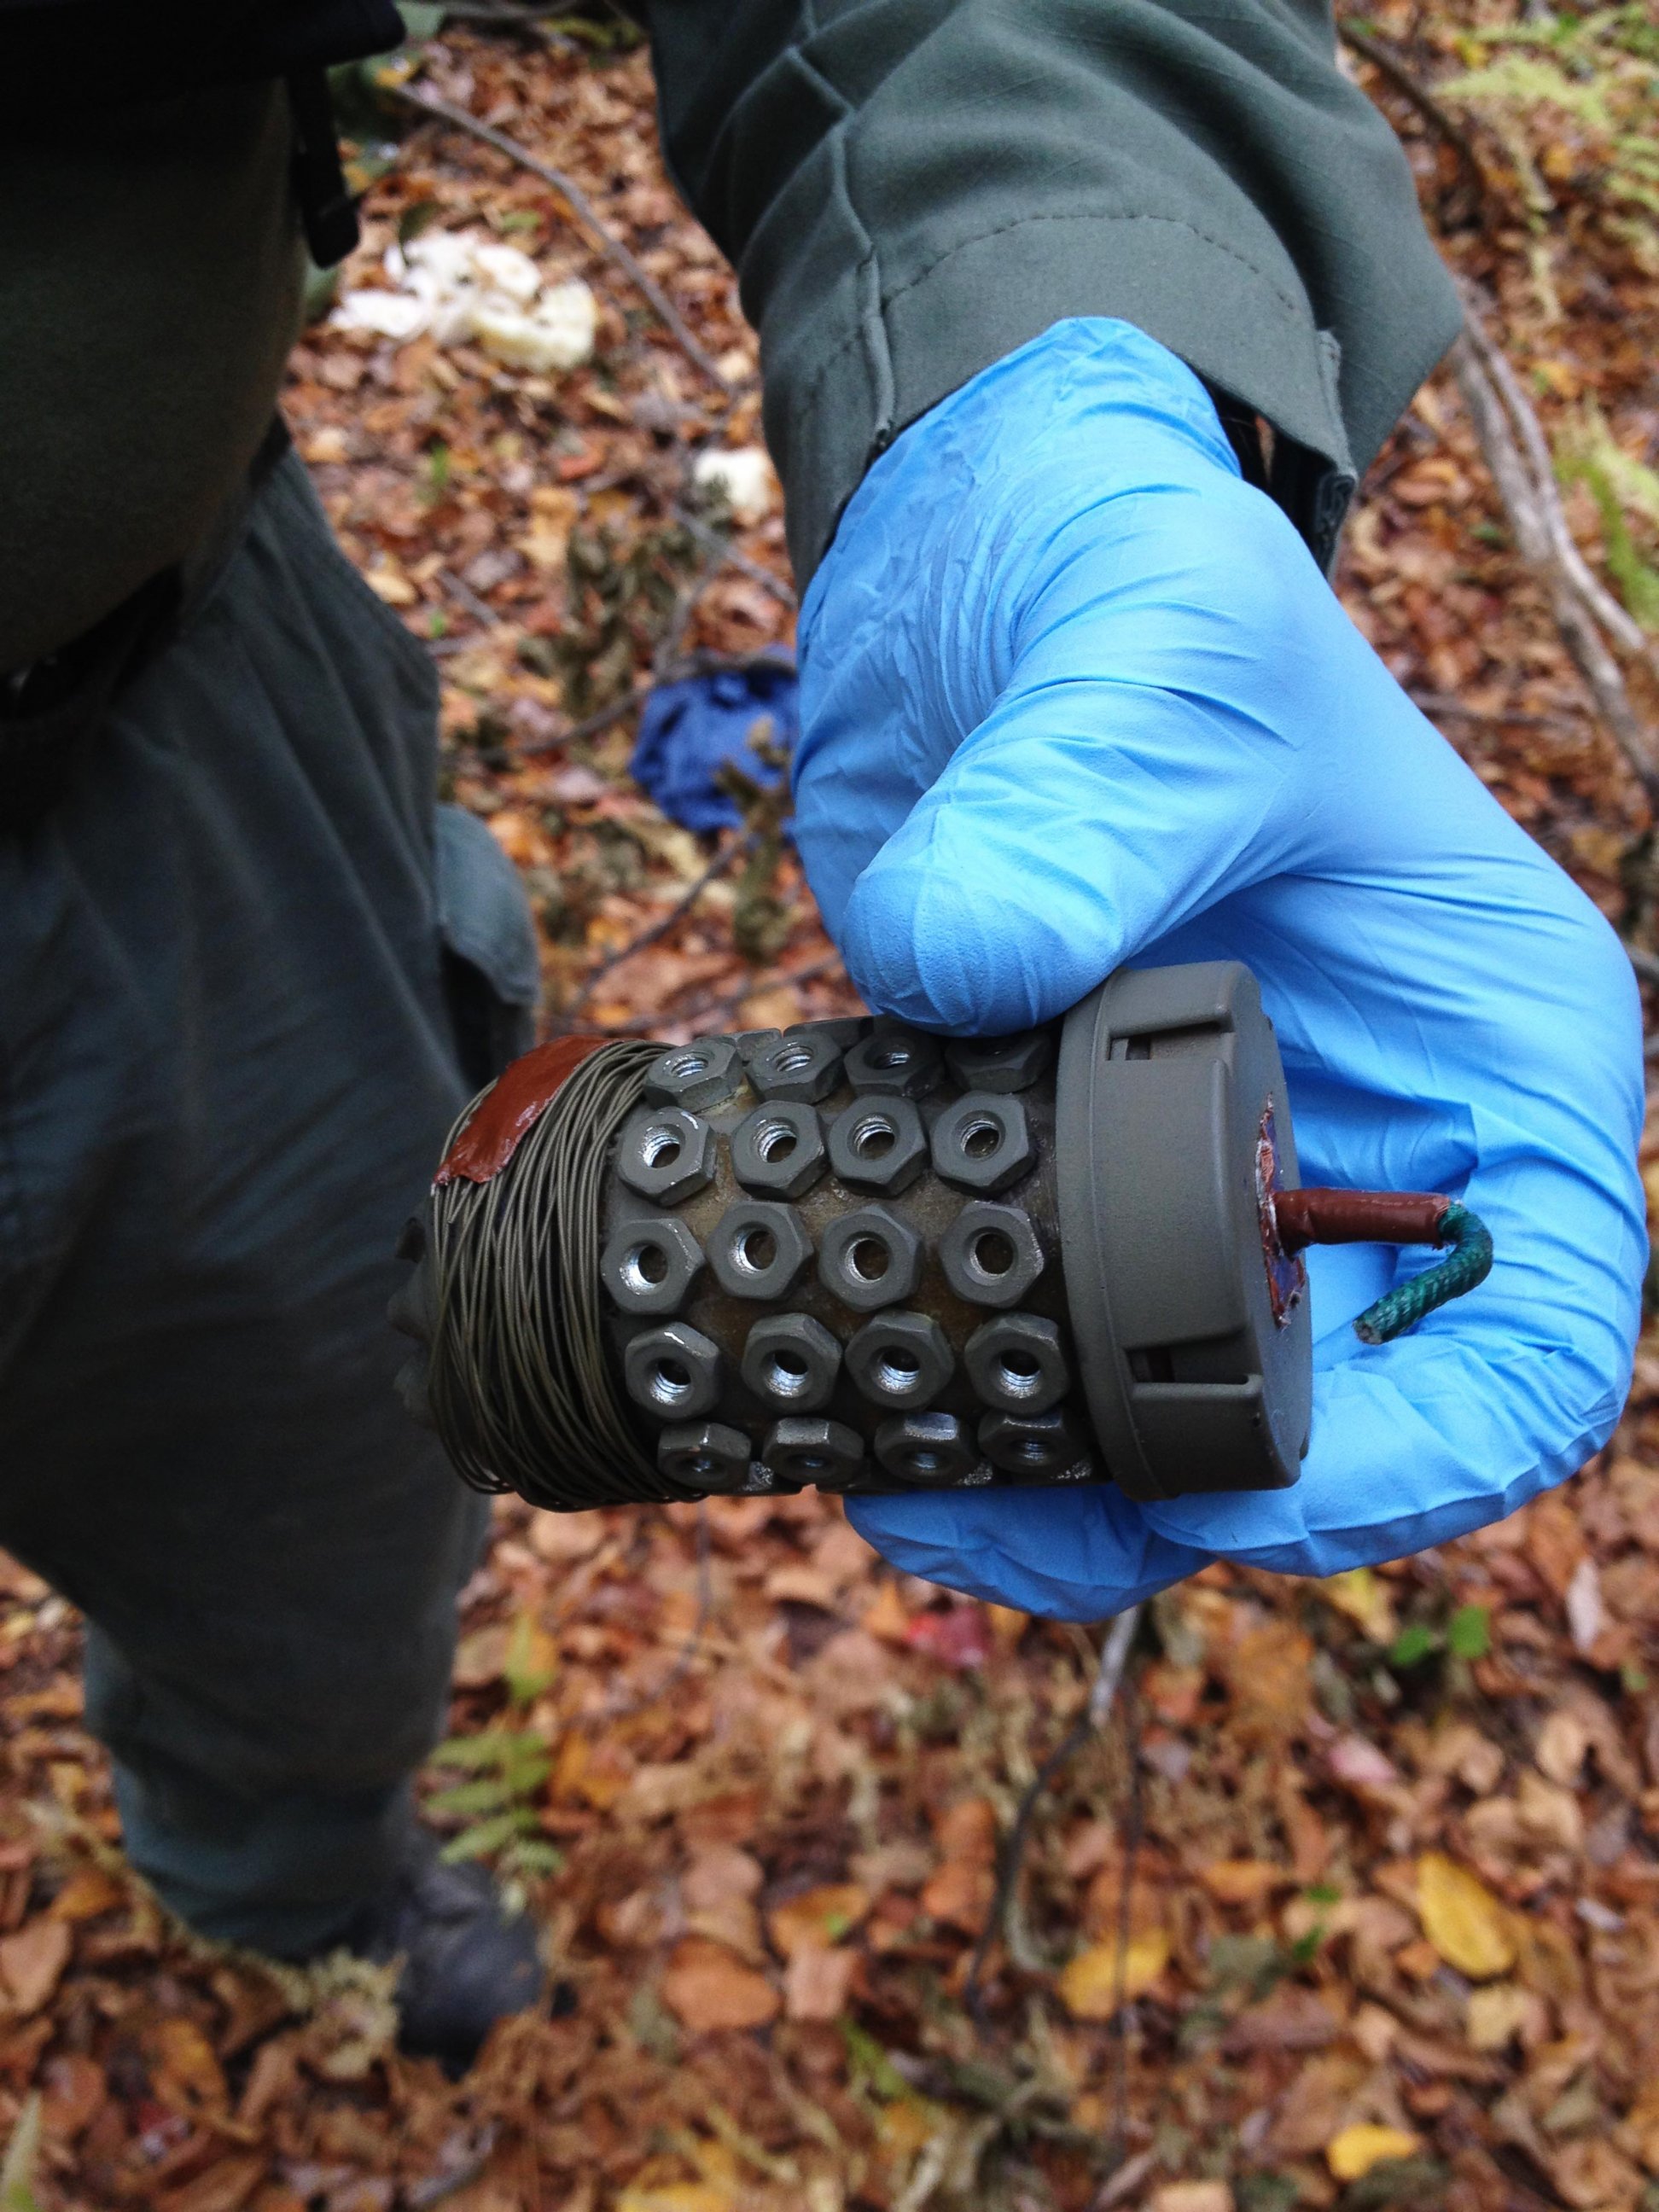 PHOTO: Police said the pipe bombs found in the search for Eric Frein were ‘fully functional.’